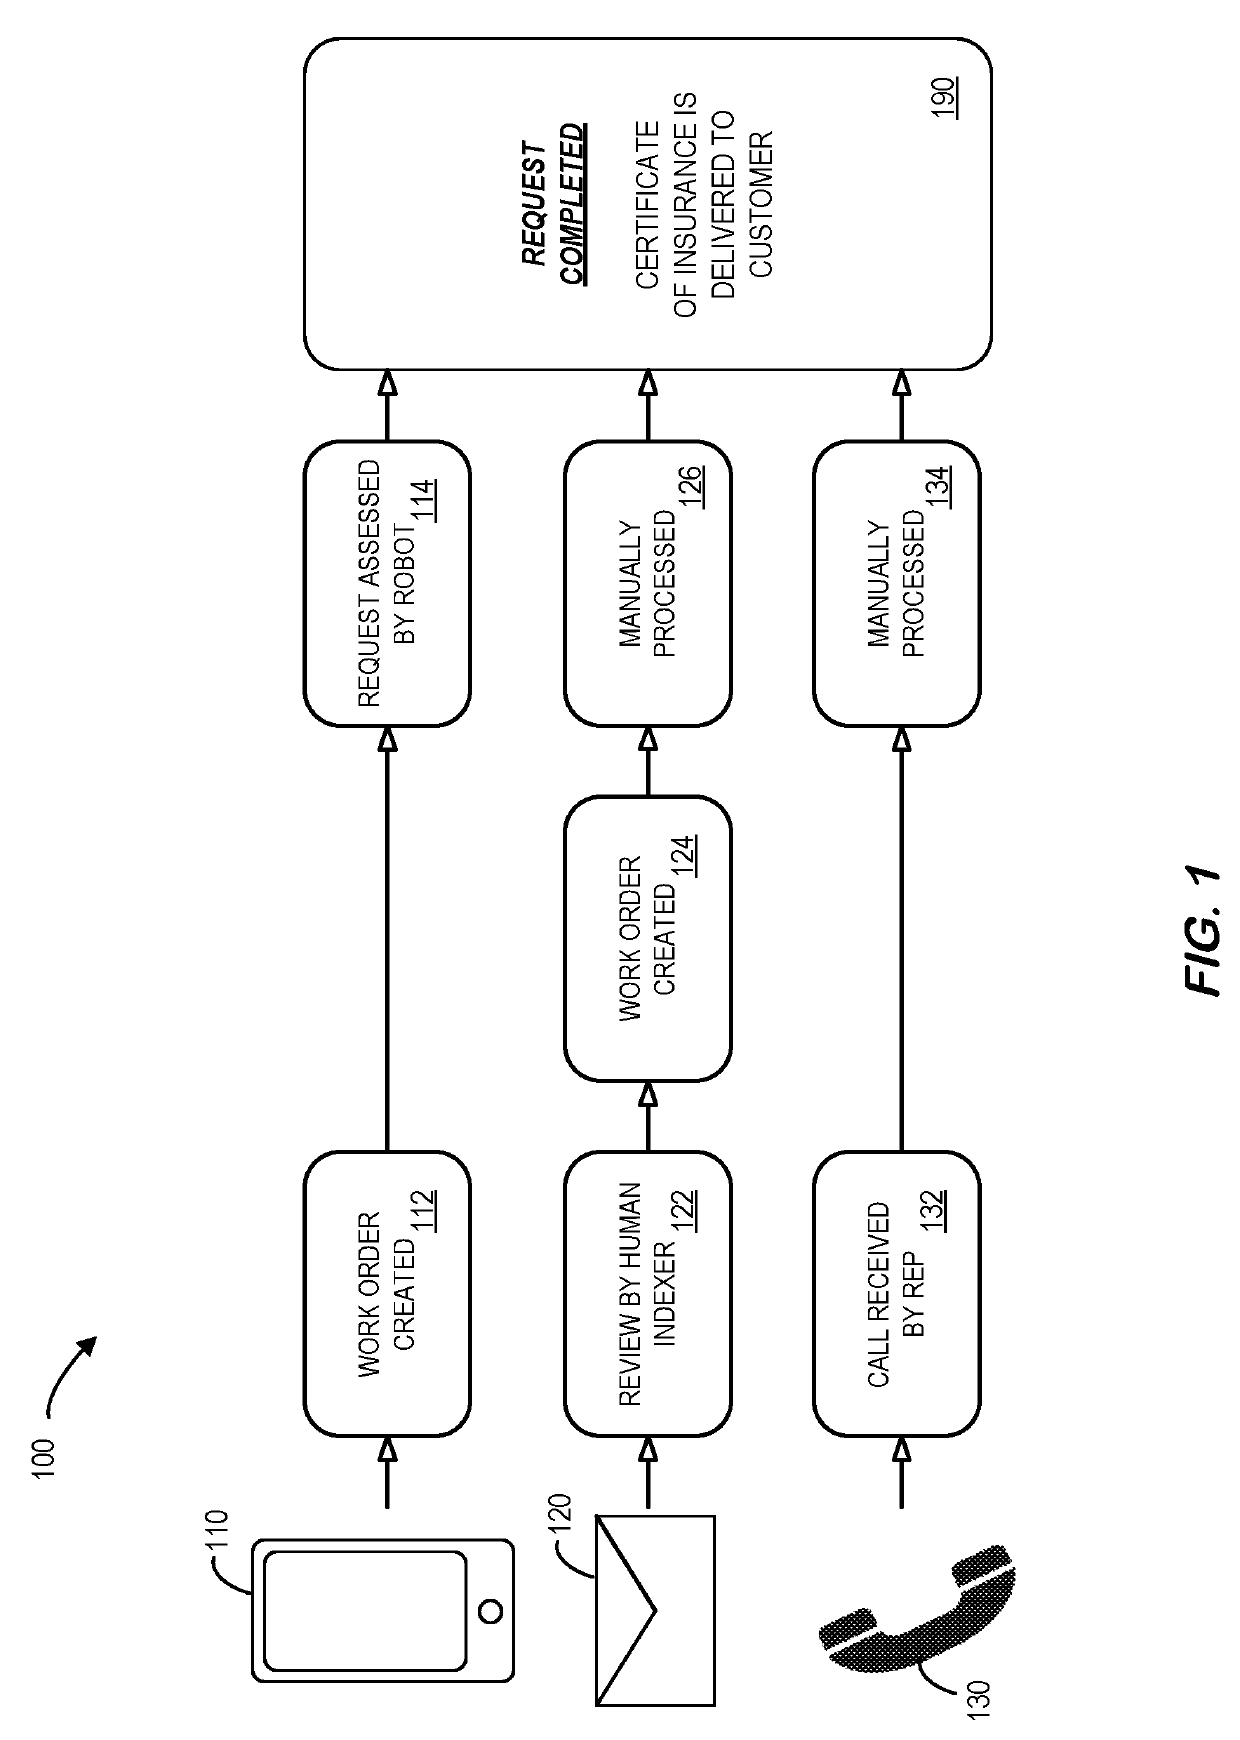 System to process electronic records using a request orchestration platform